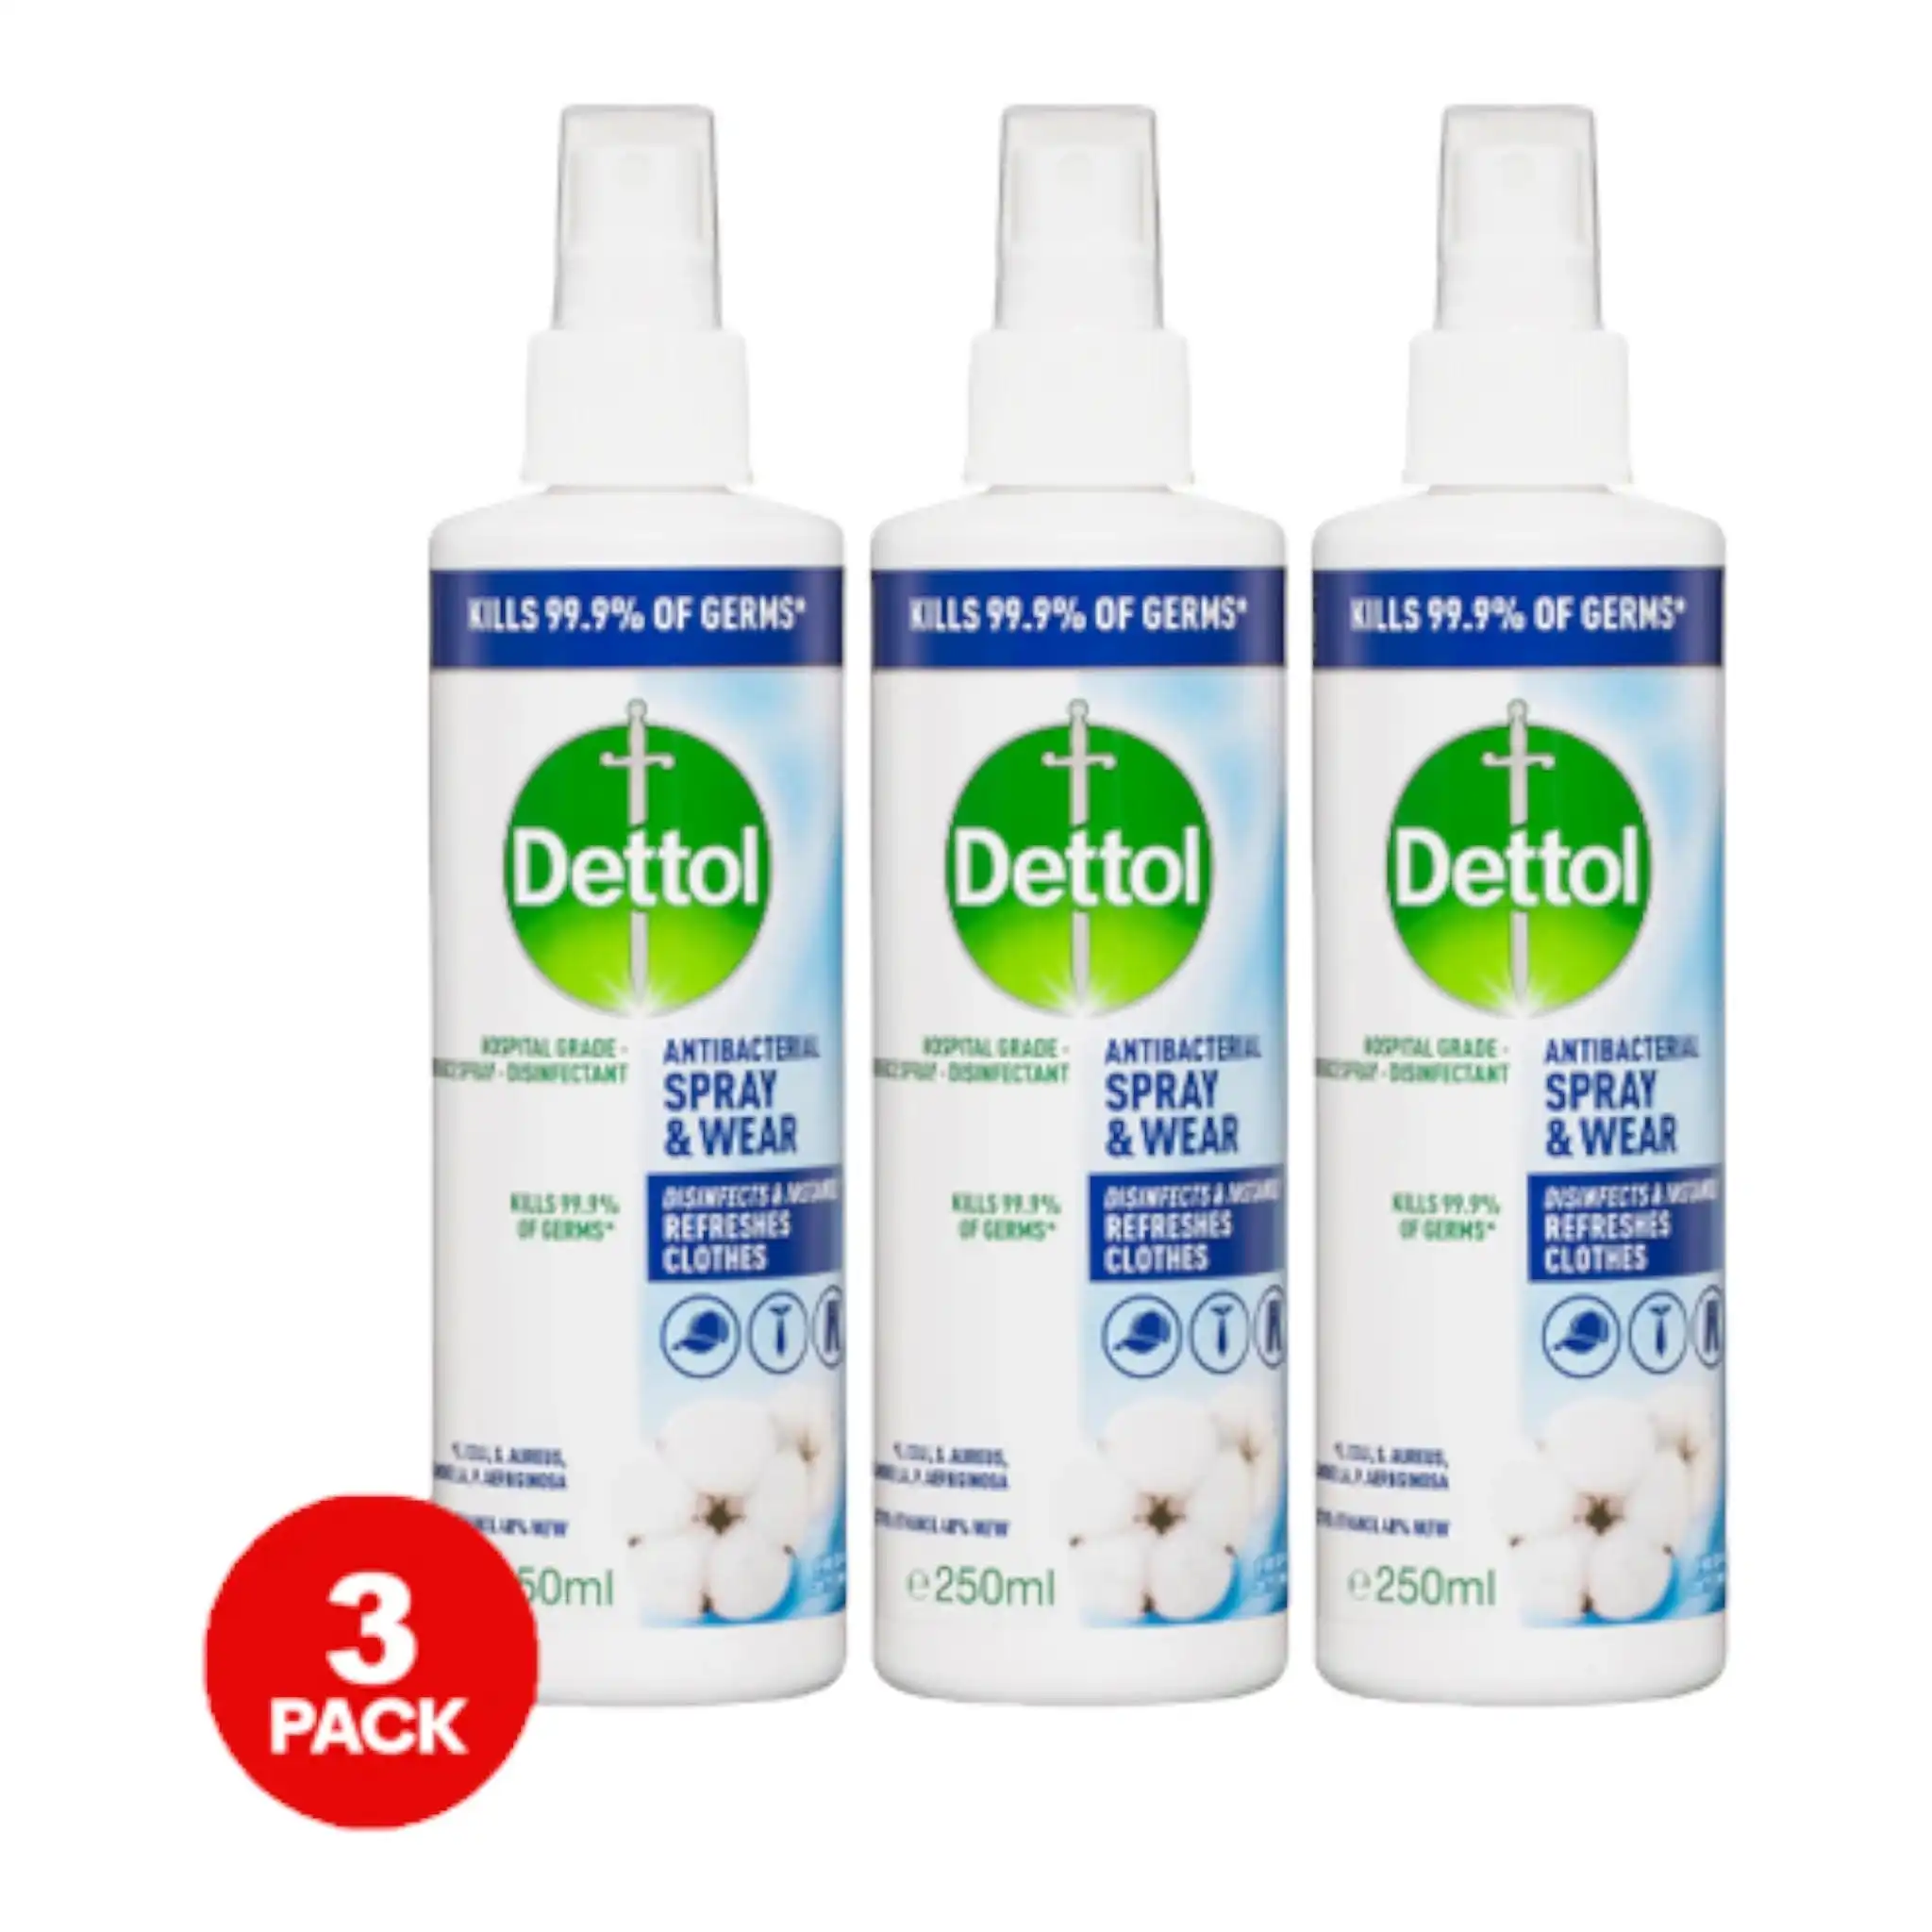 3 Pack Dettol Antibacterial Spray & Wear Fresh Clothes Disinfectant Cotton 250mL